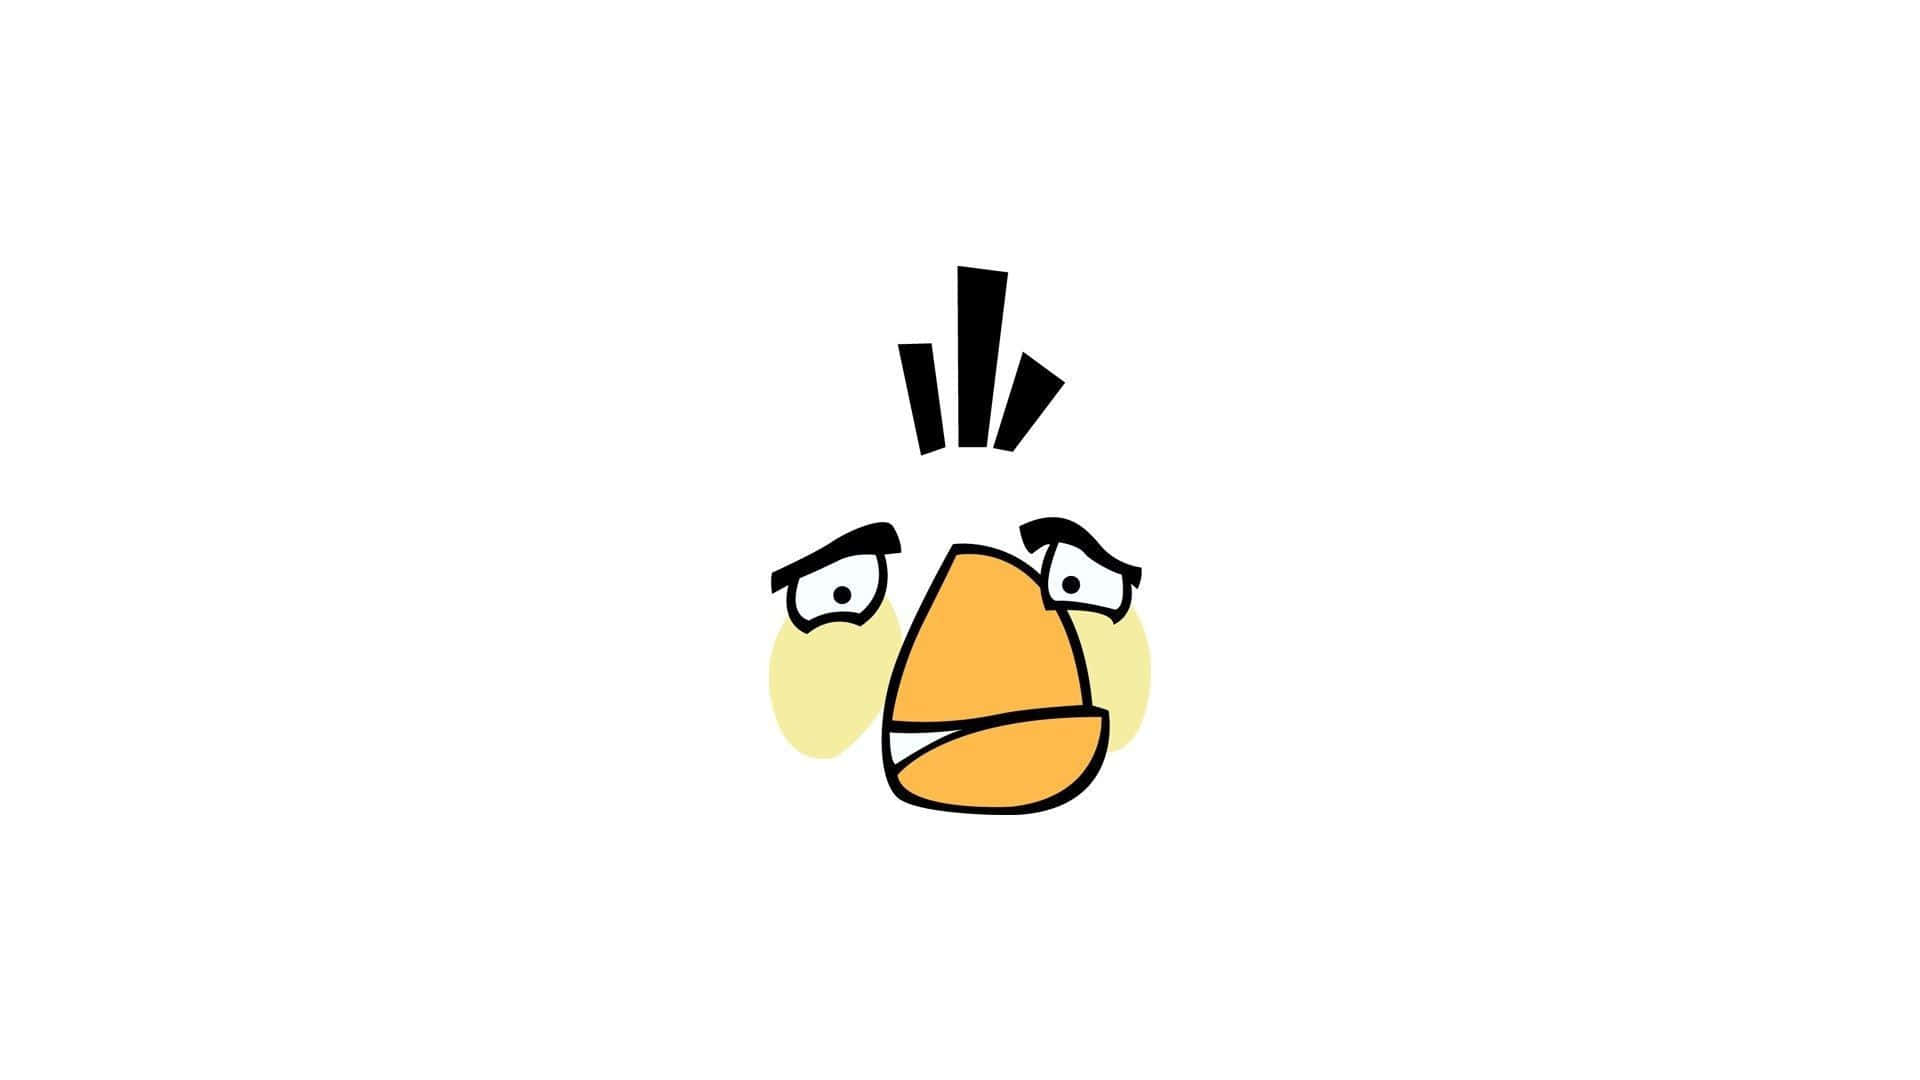 Angry Birds Yellow Bird Expression Wallpaper